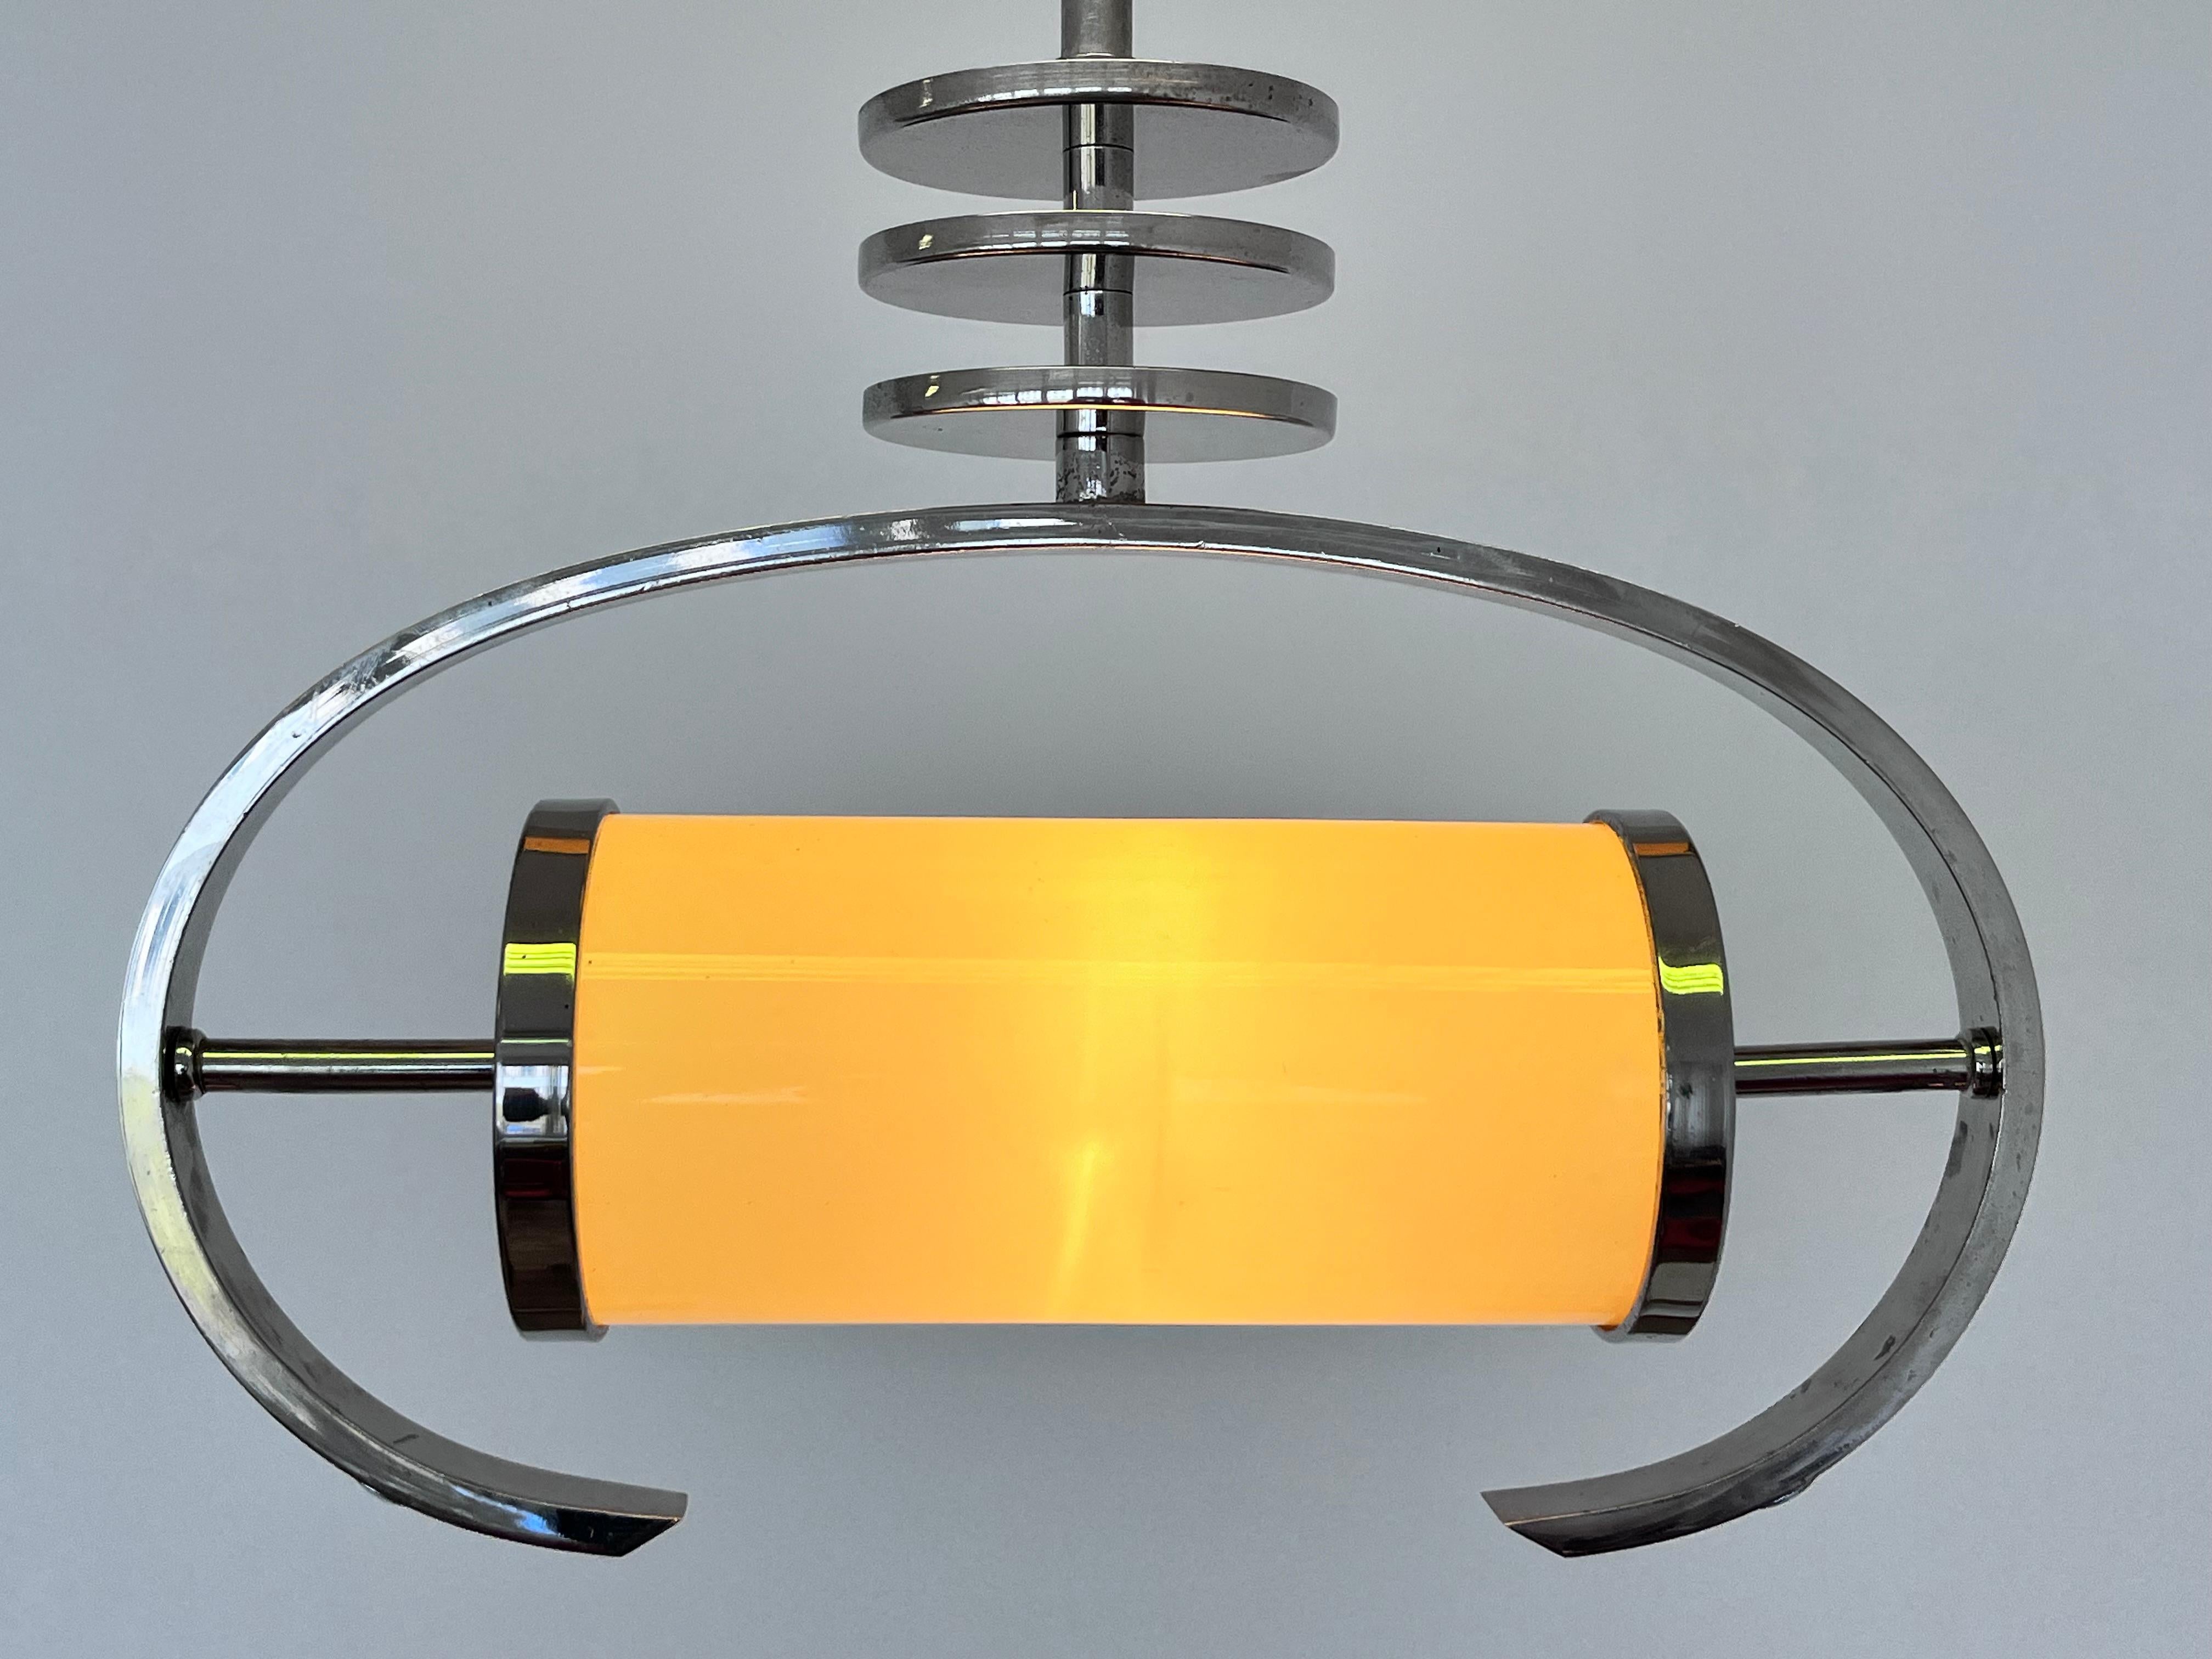 Bauhaus / functionalist chrome pendant / lamp - 1930s In Good Condition For Sale In Praha, CZ